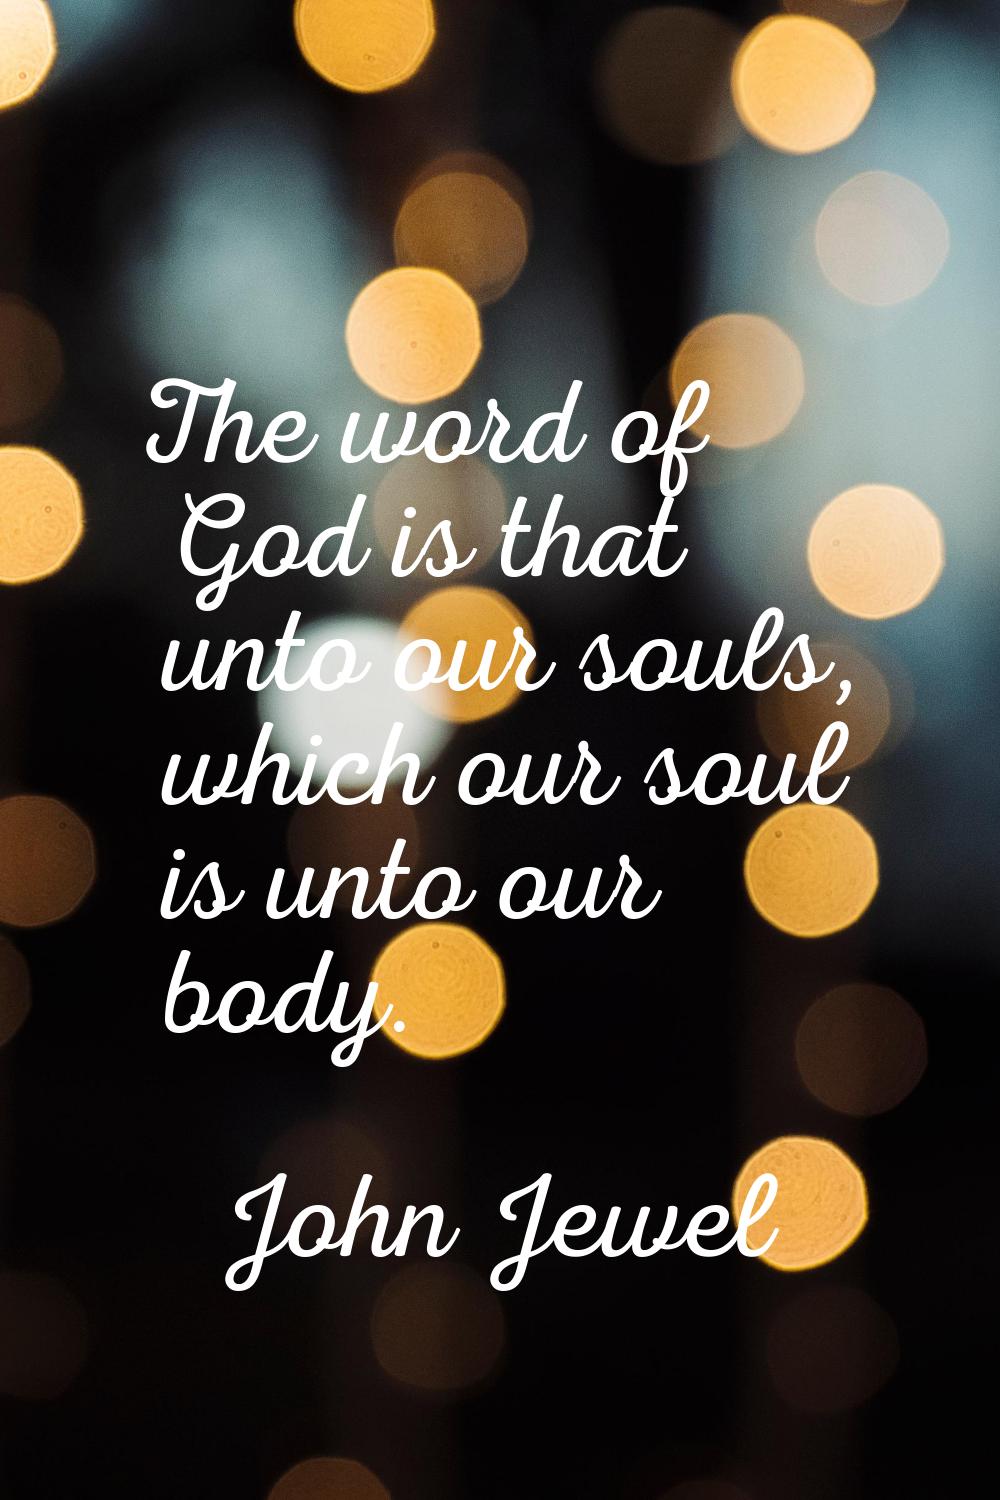 The word of God is that unto our souls, which our soul is unto our body.